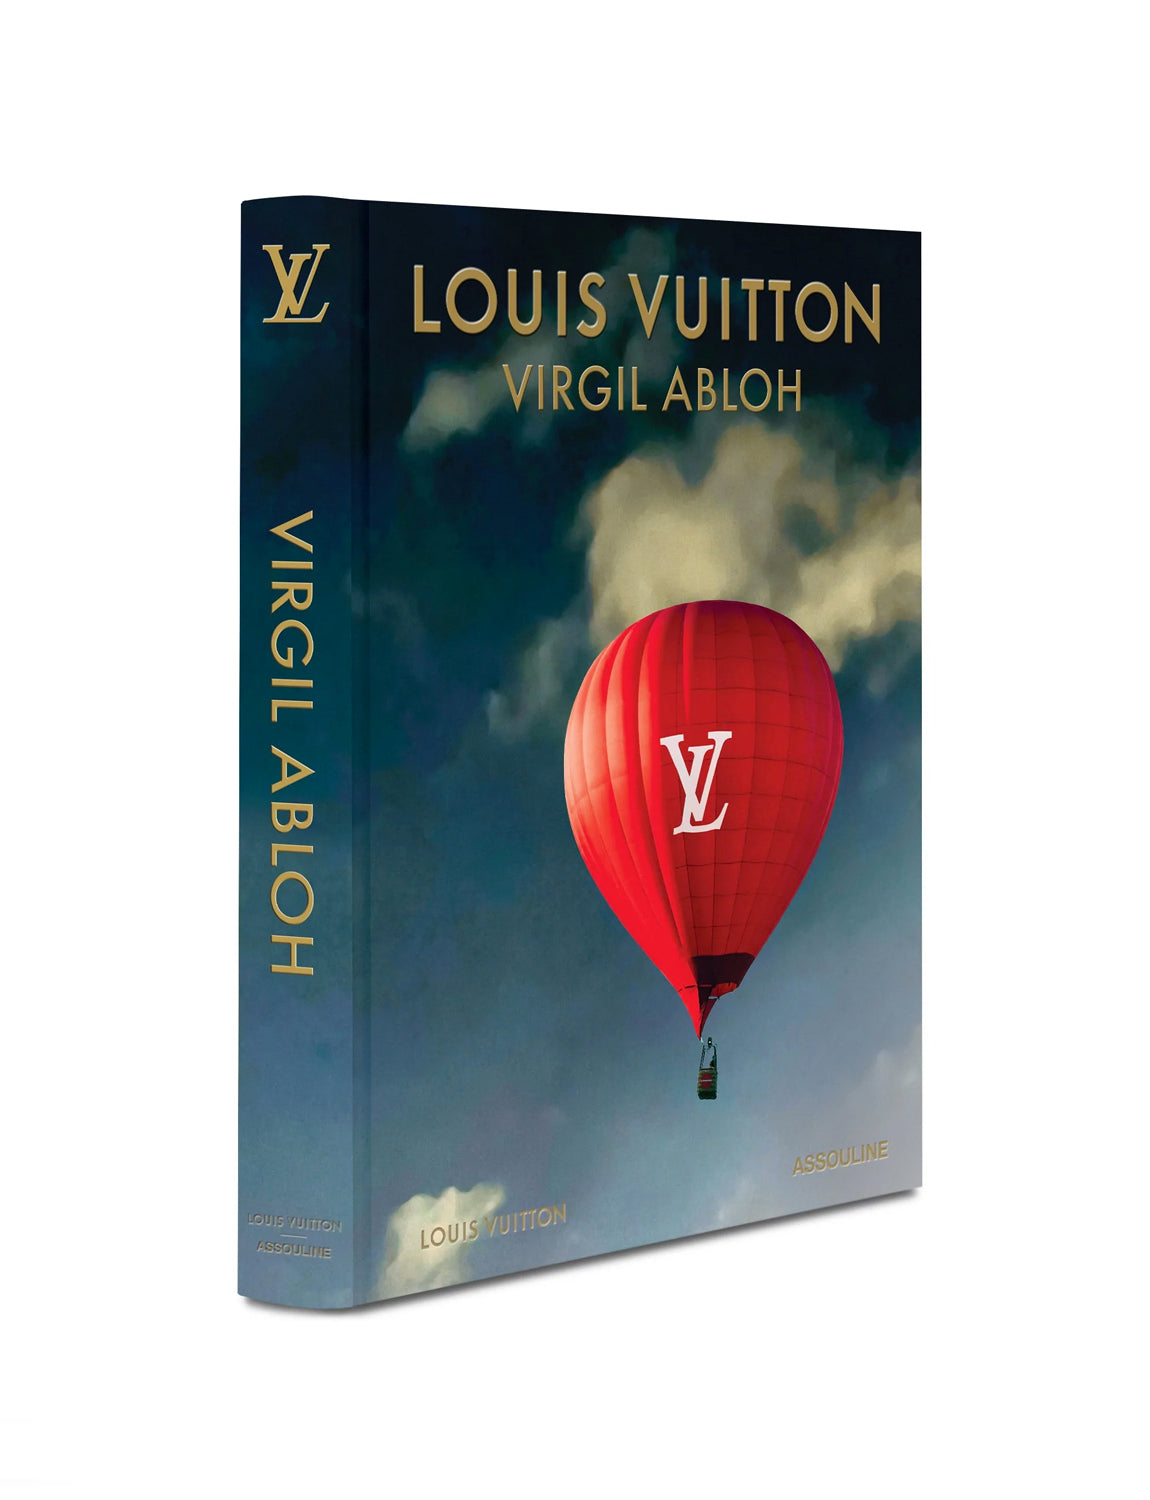 Louis Vuitton: Virgil Abloh (Classic Cartoon Cover) - Assouline Coffee  Table Book: Madsen, Anders Christian: 9781649801524: : Books